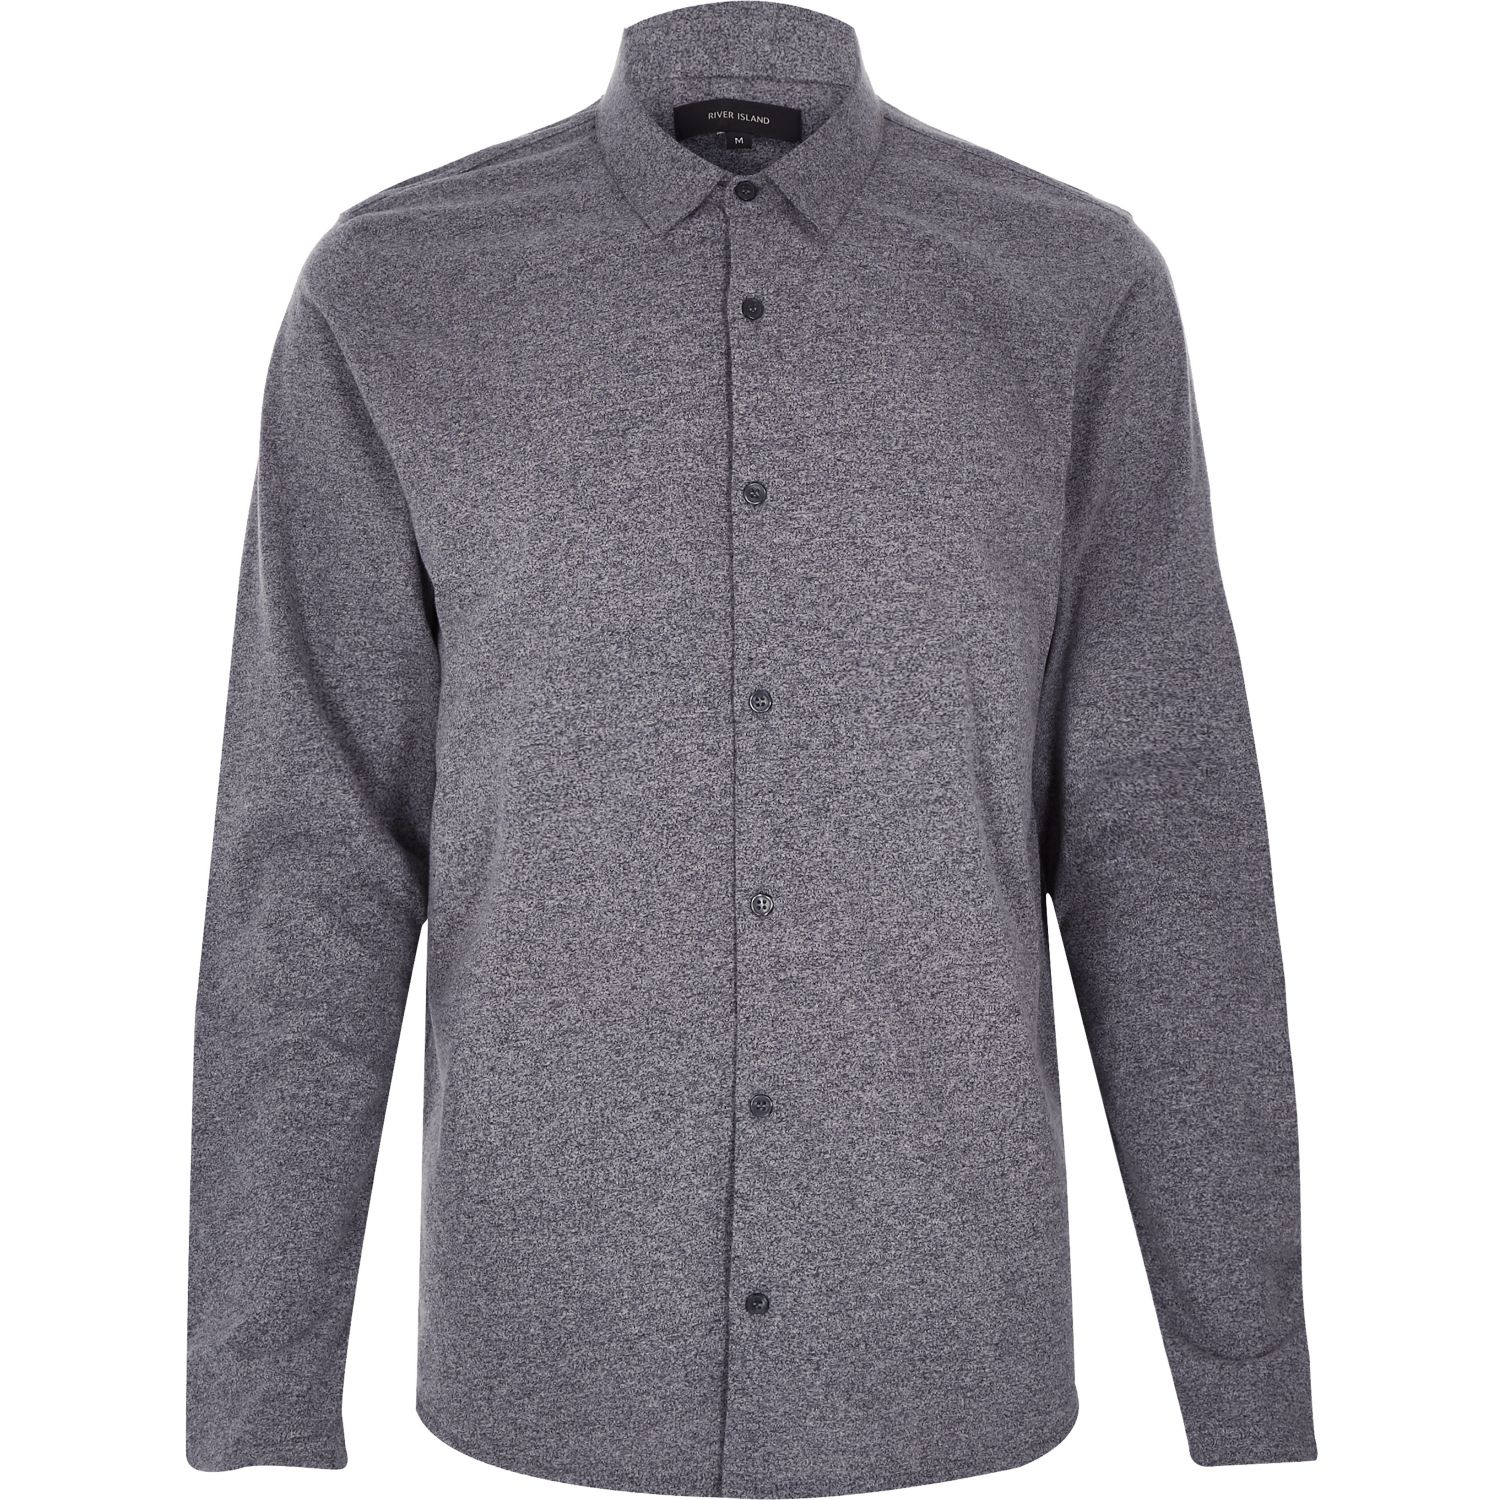 River Island Grey Button Up Shirt in Gray for Men - Lyst